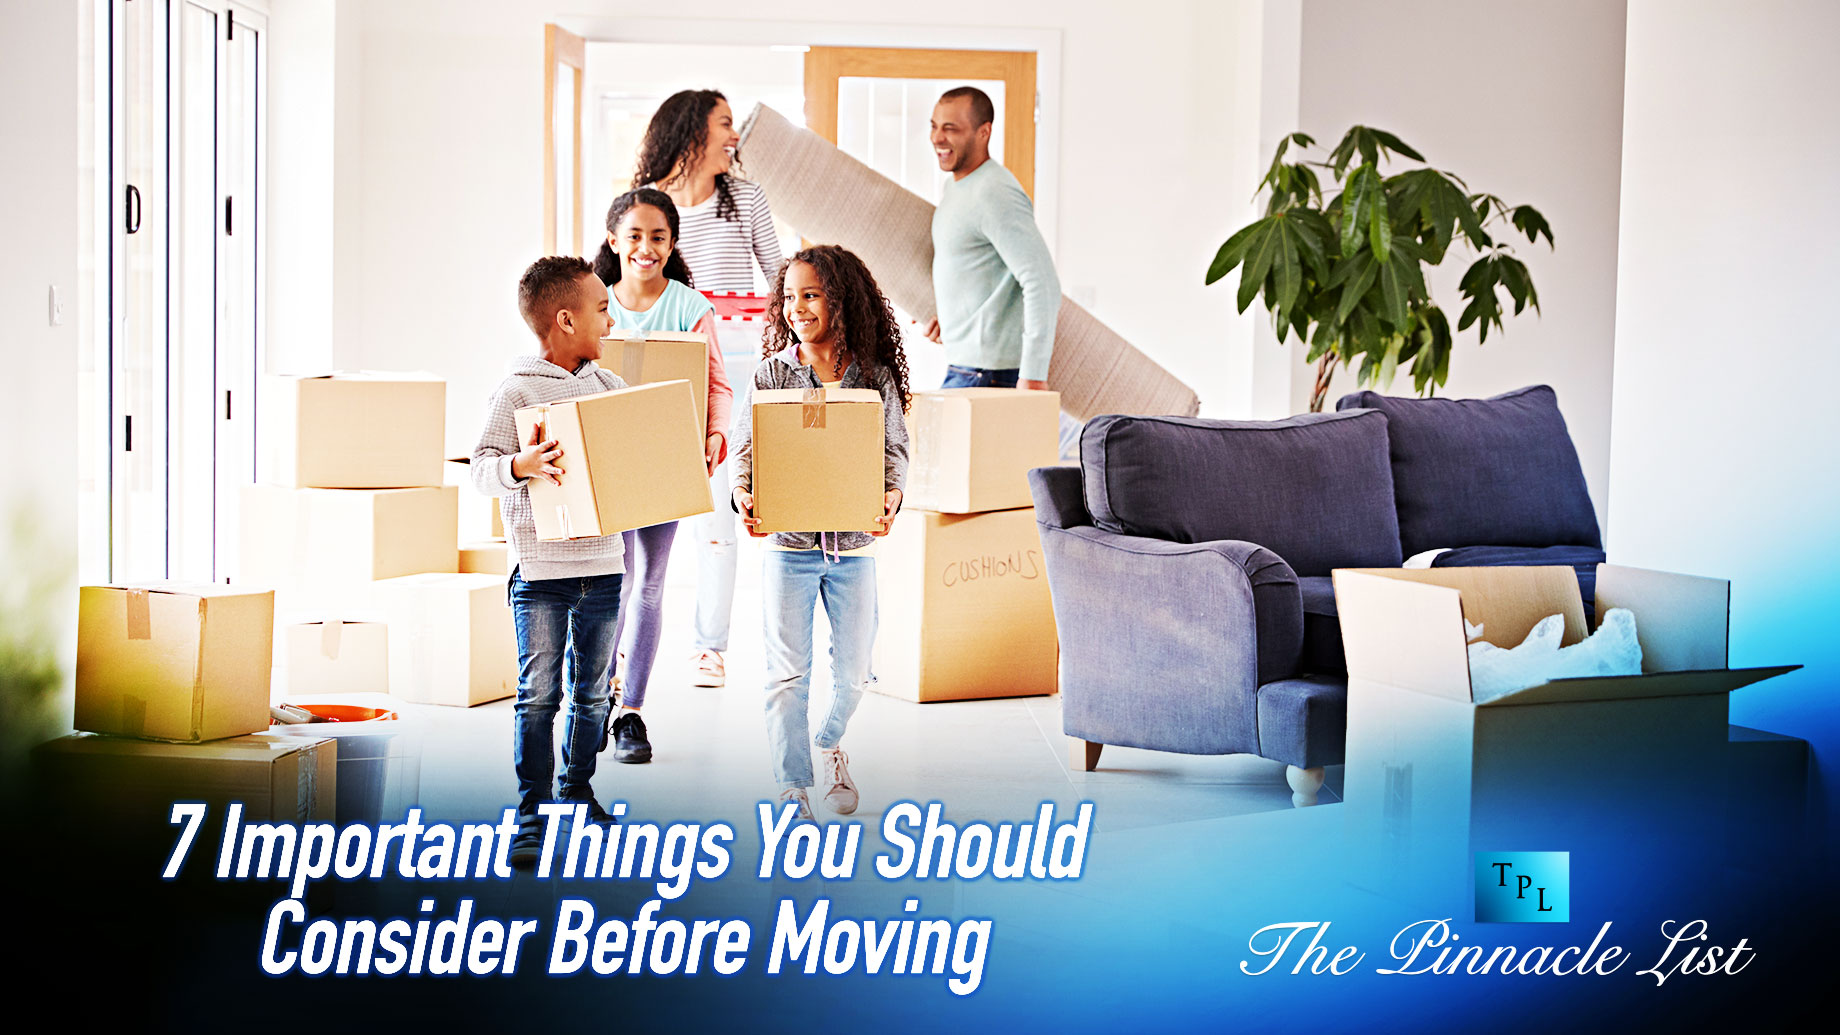 7 Important Things You Should Consider Before Moving